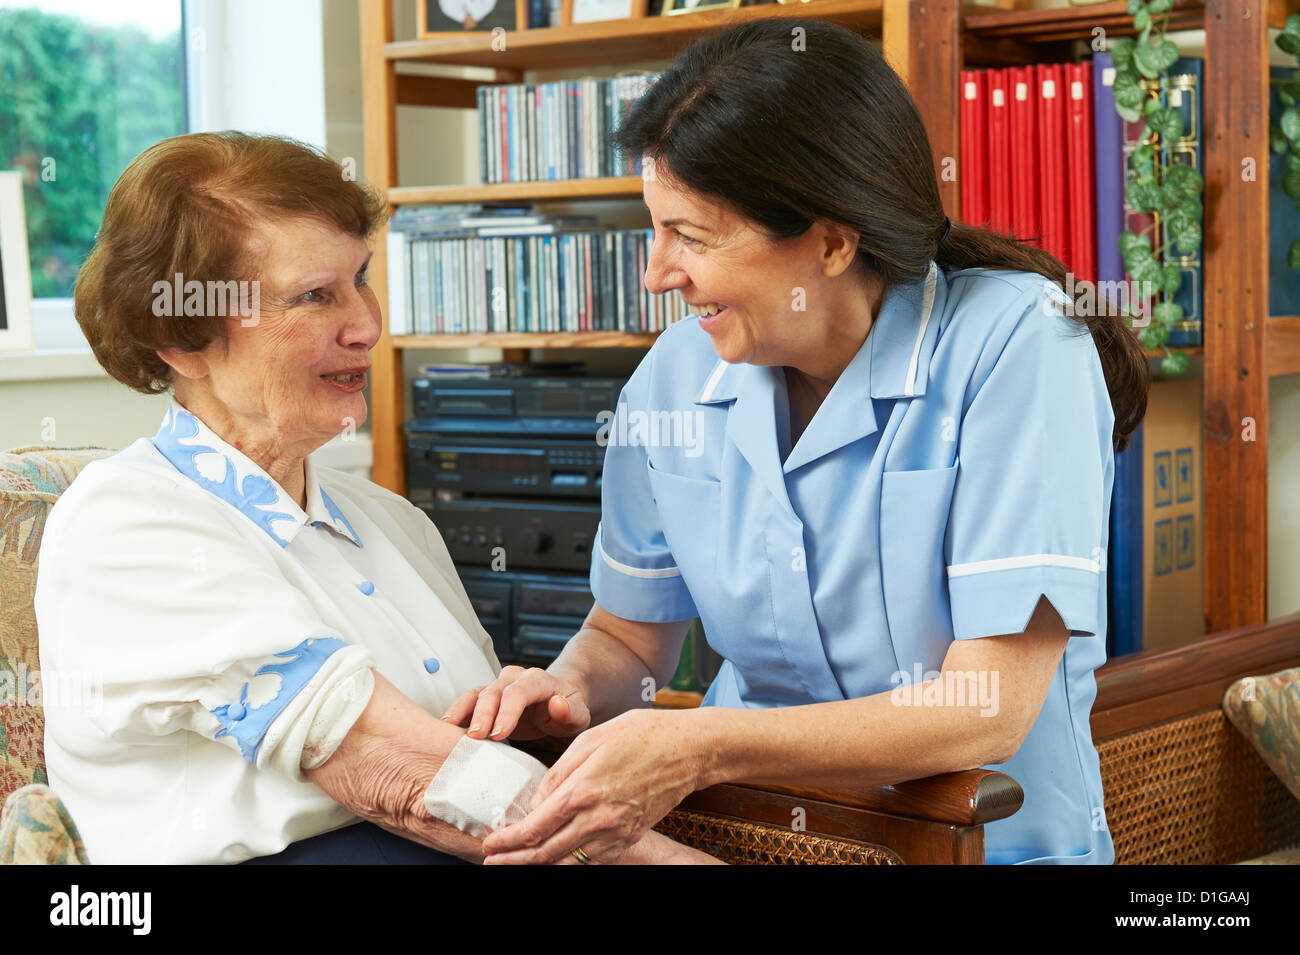 health care worker dressing wound on a senior womans arm at home Stock Photo